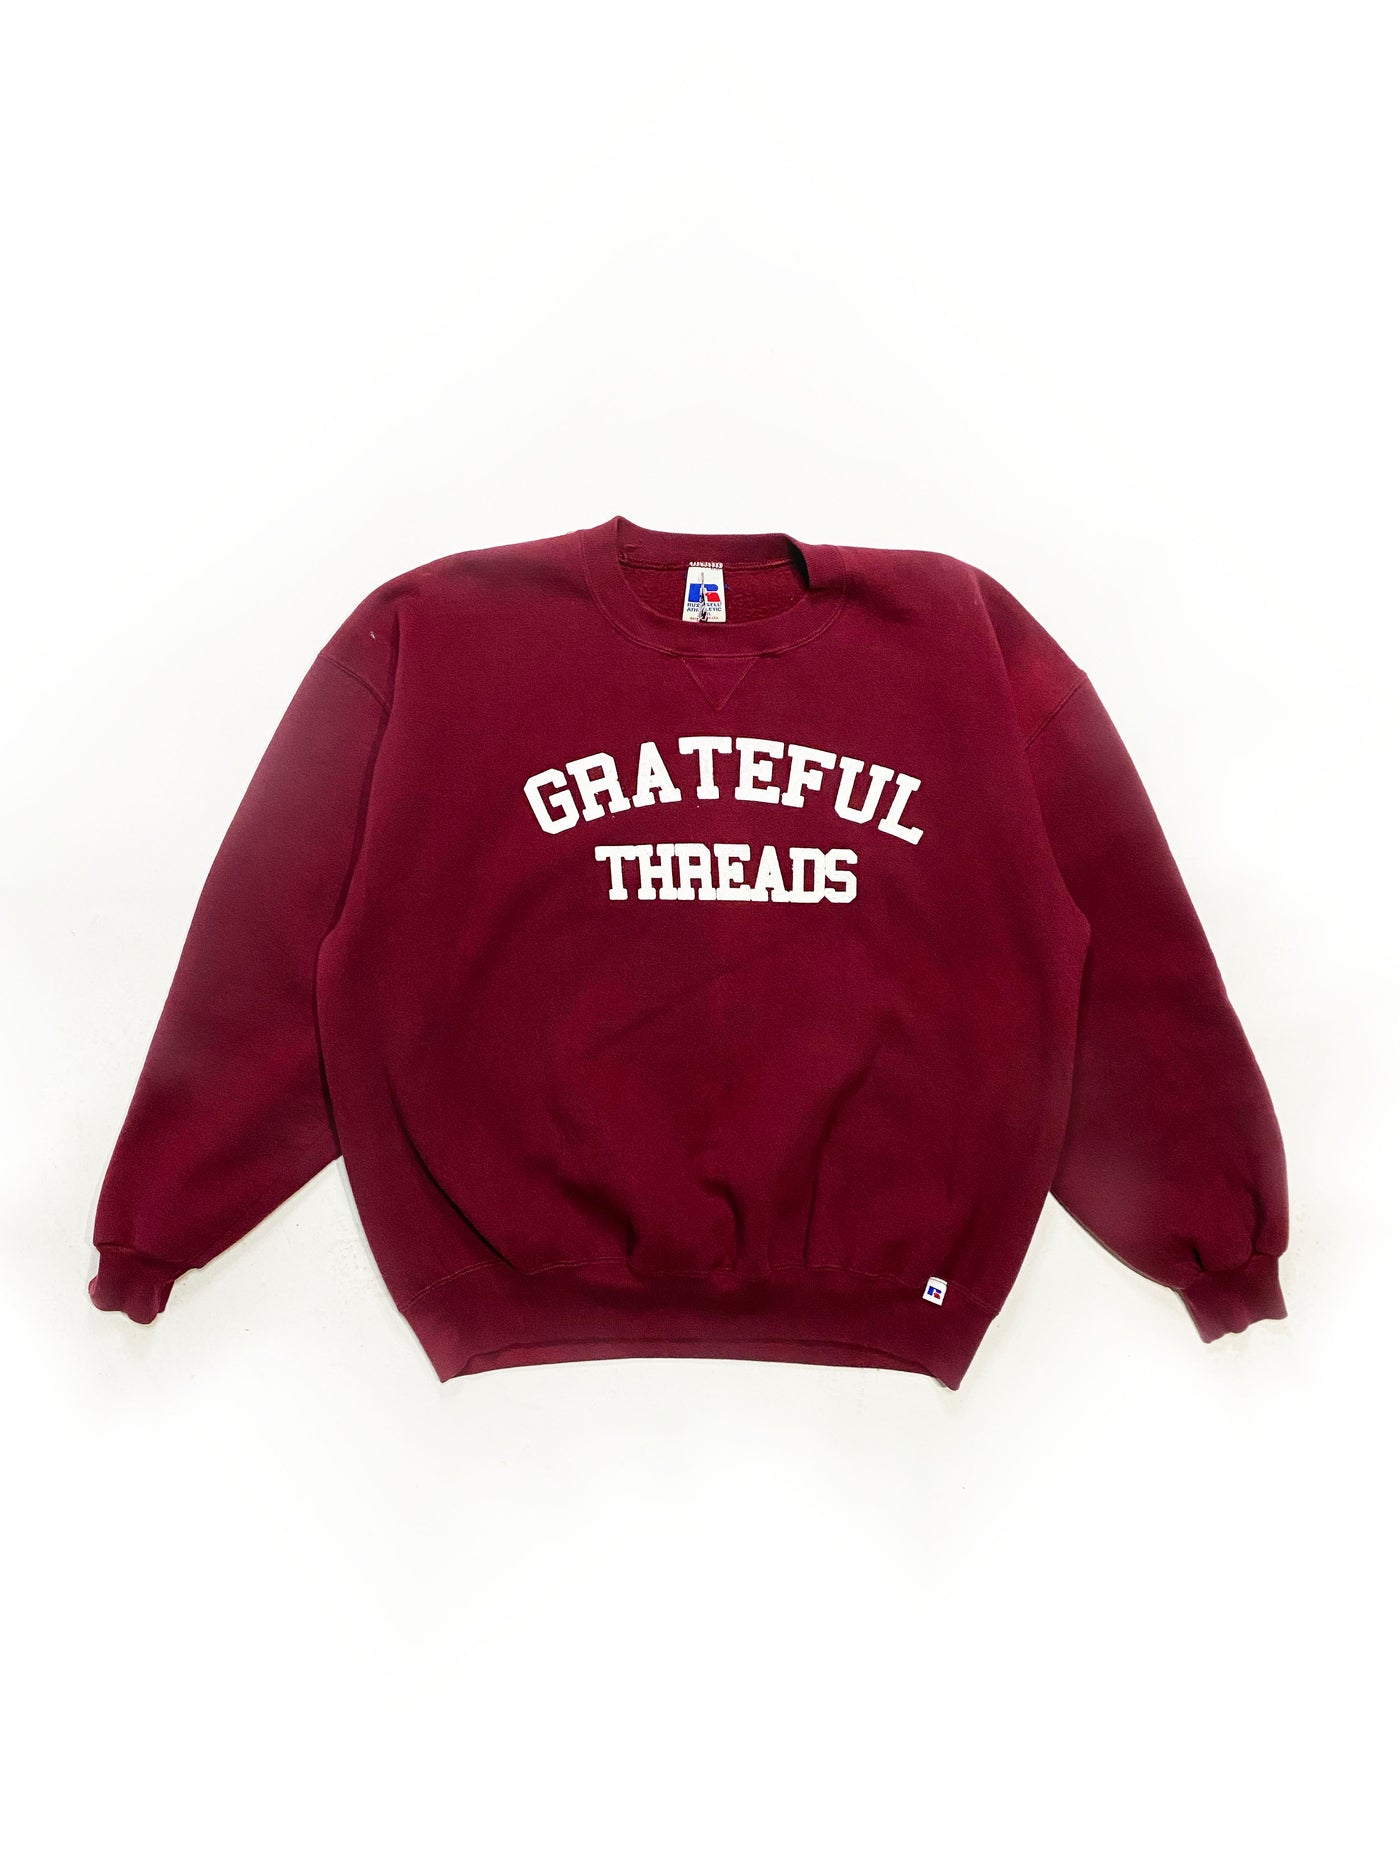 90s Russell Grateful Threads Spellout Crewneck - Maroon - Size XL